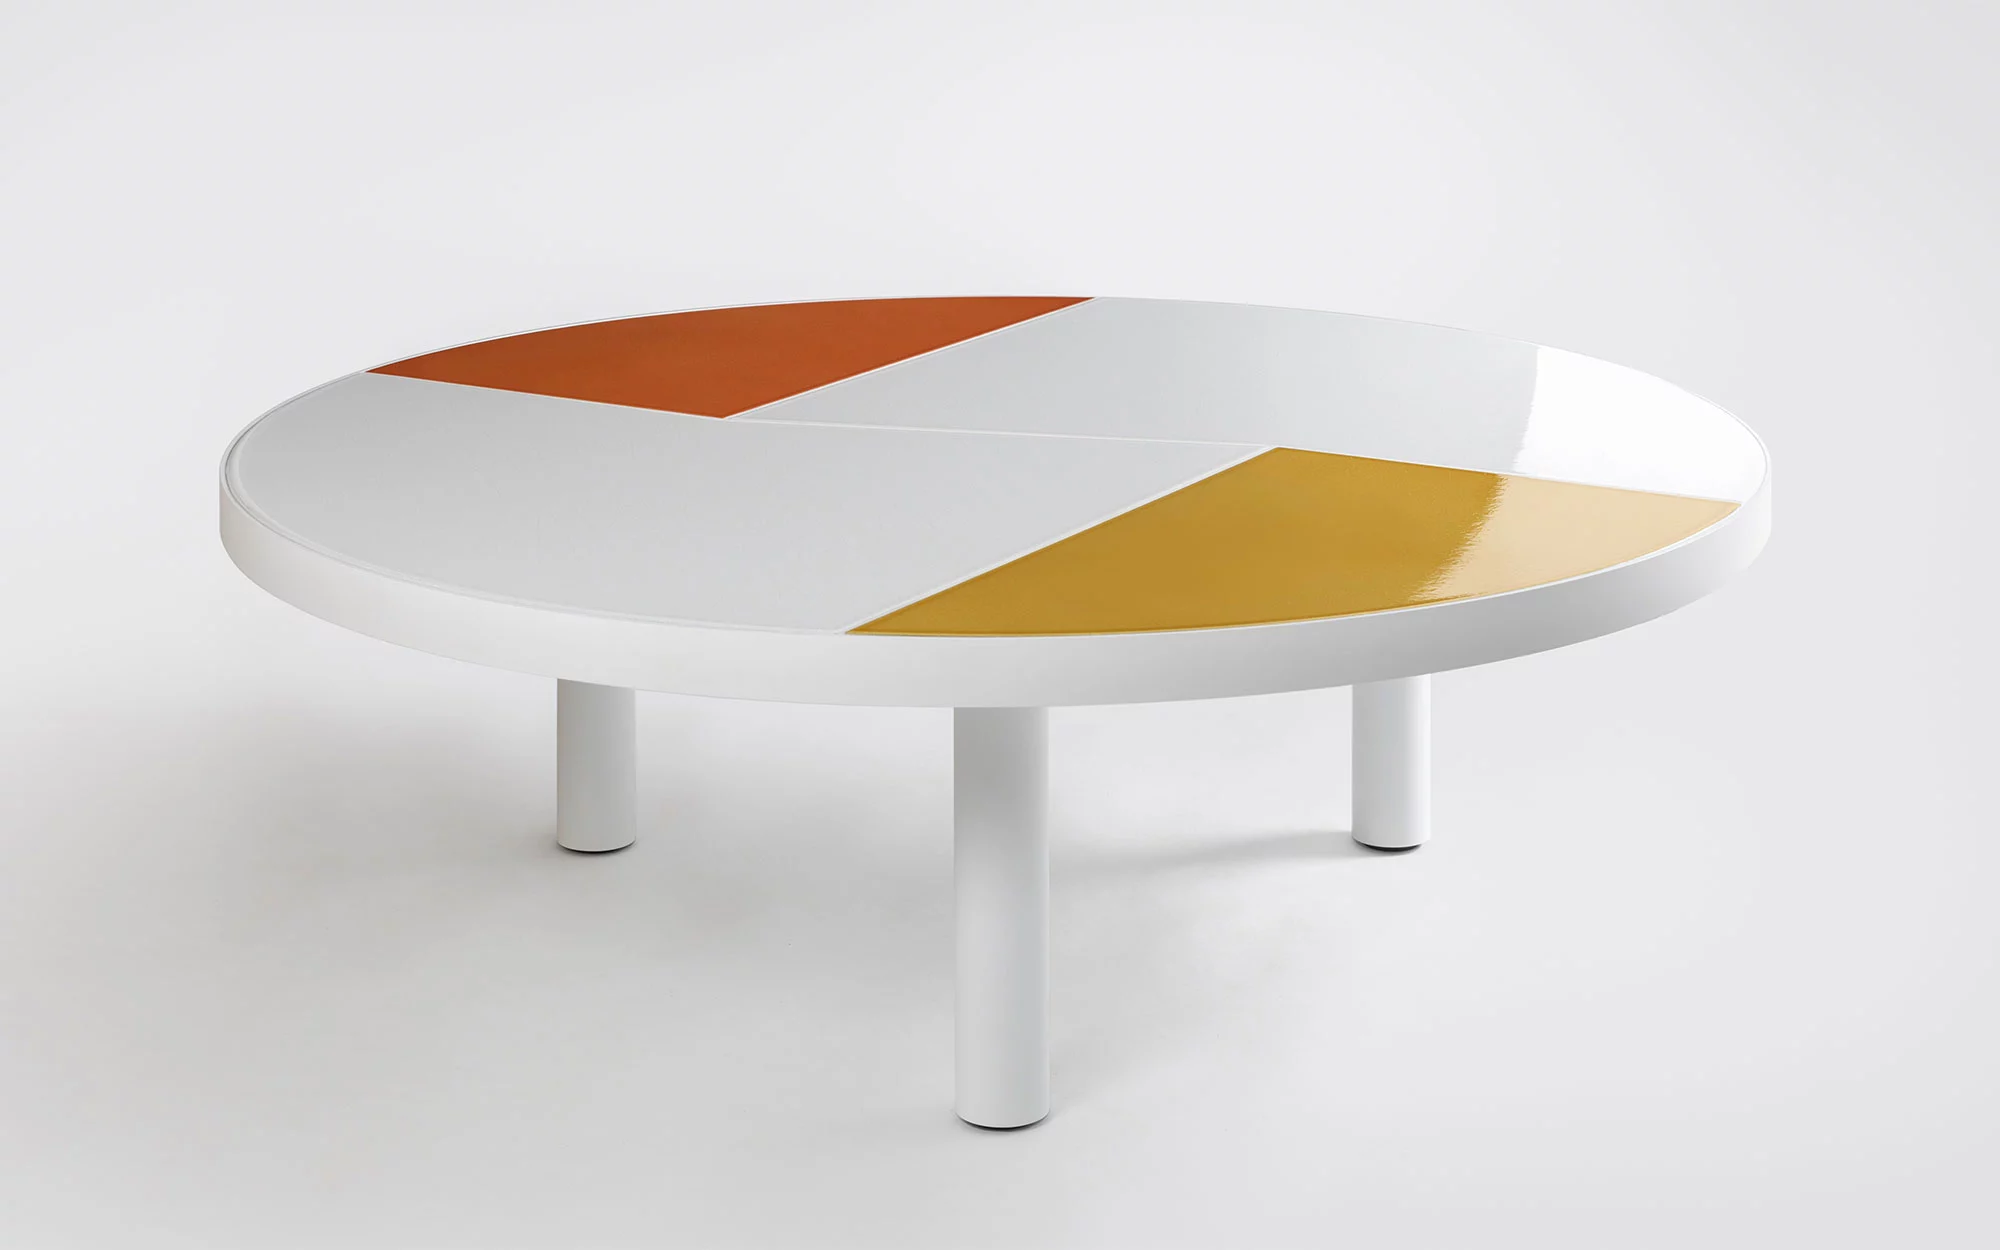 Fraction Coffee Table - Pierre Charpin - Console - Galerie kreo